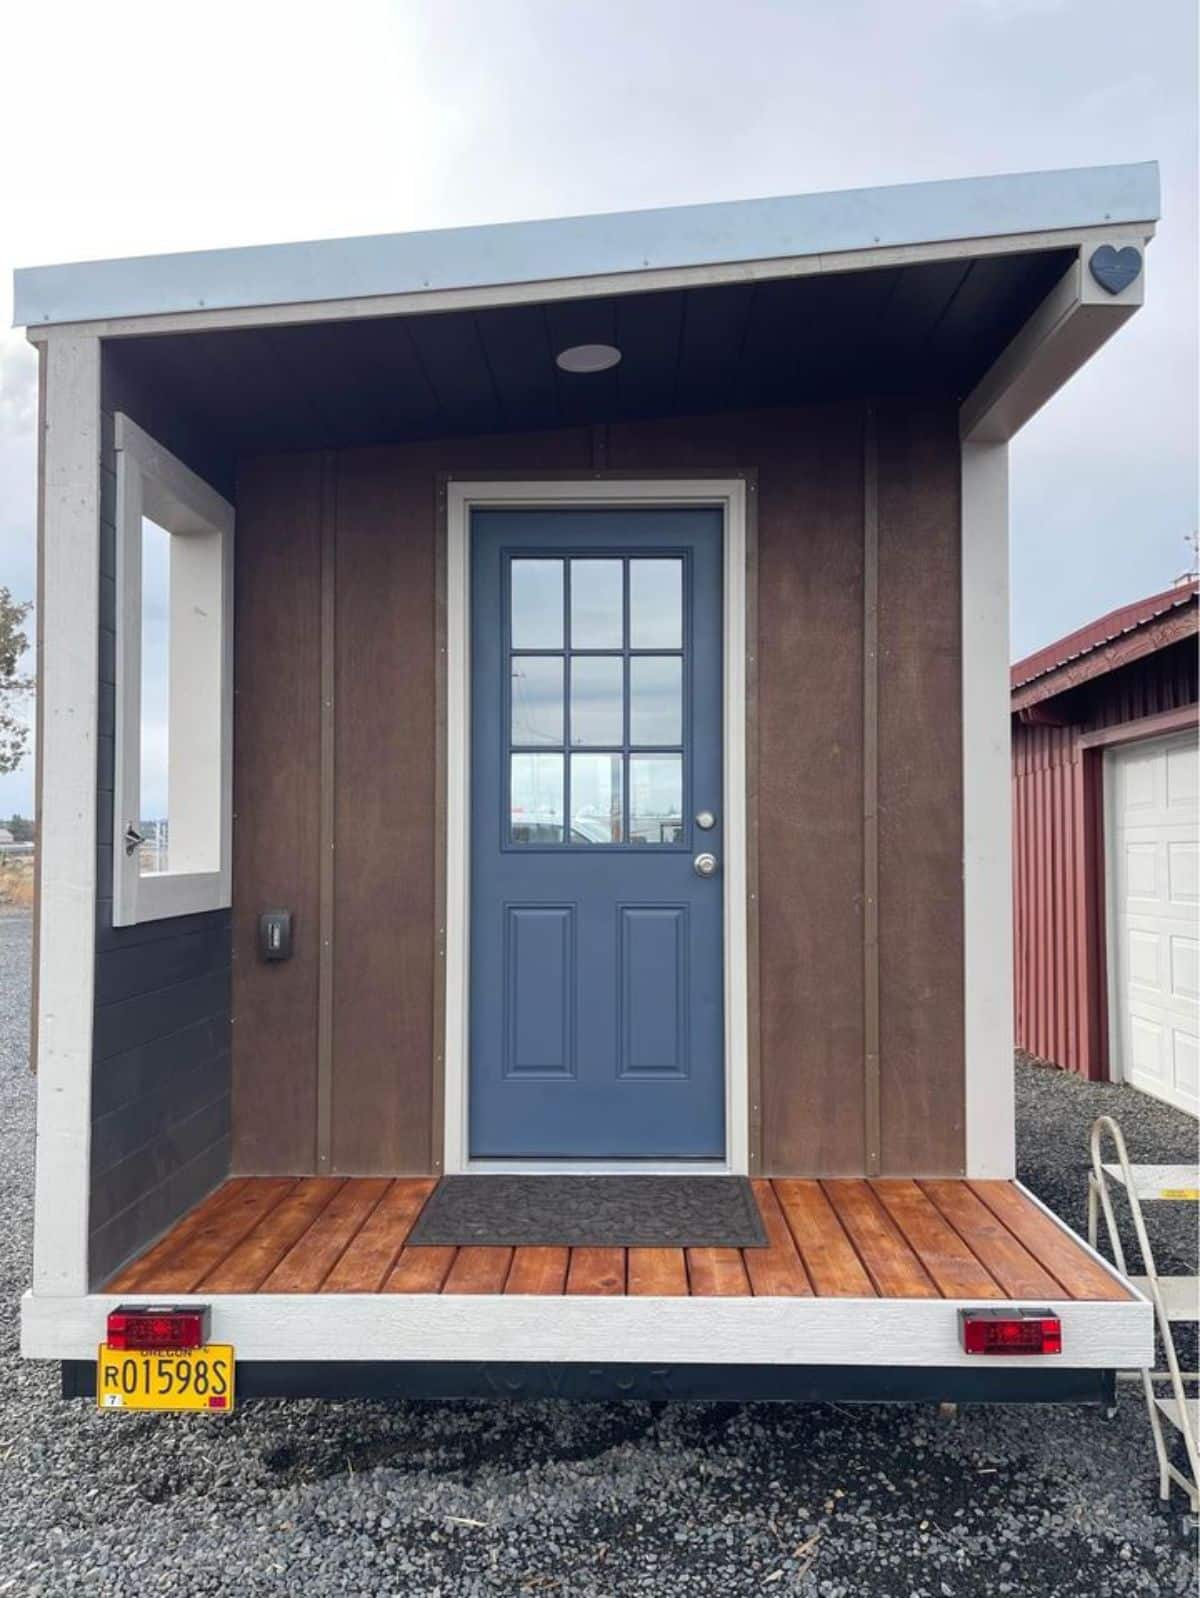 small porch outside the main entrance door of 17' furnished tiny house